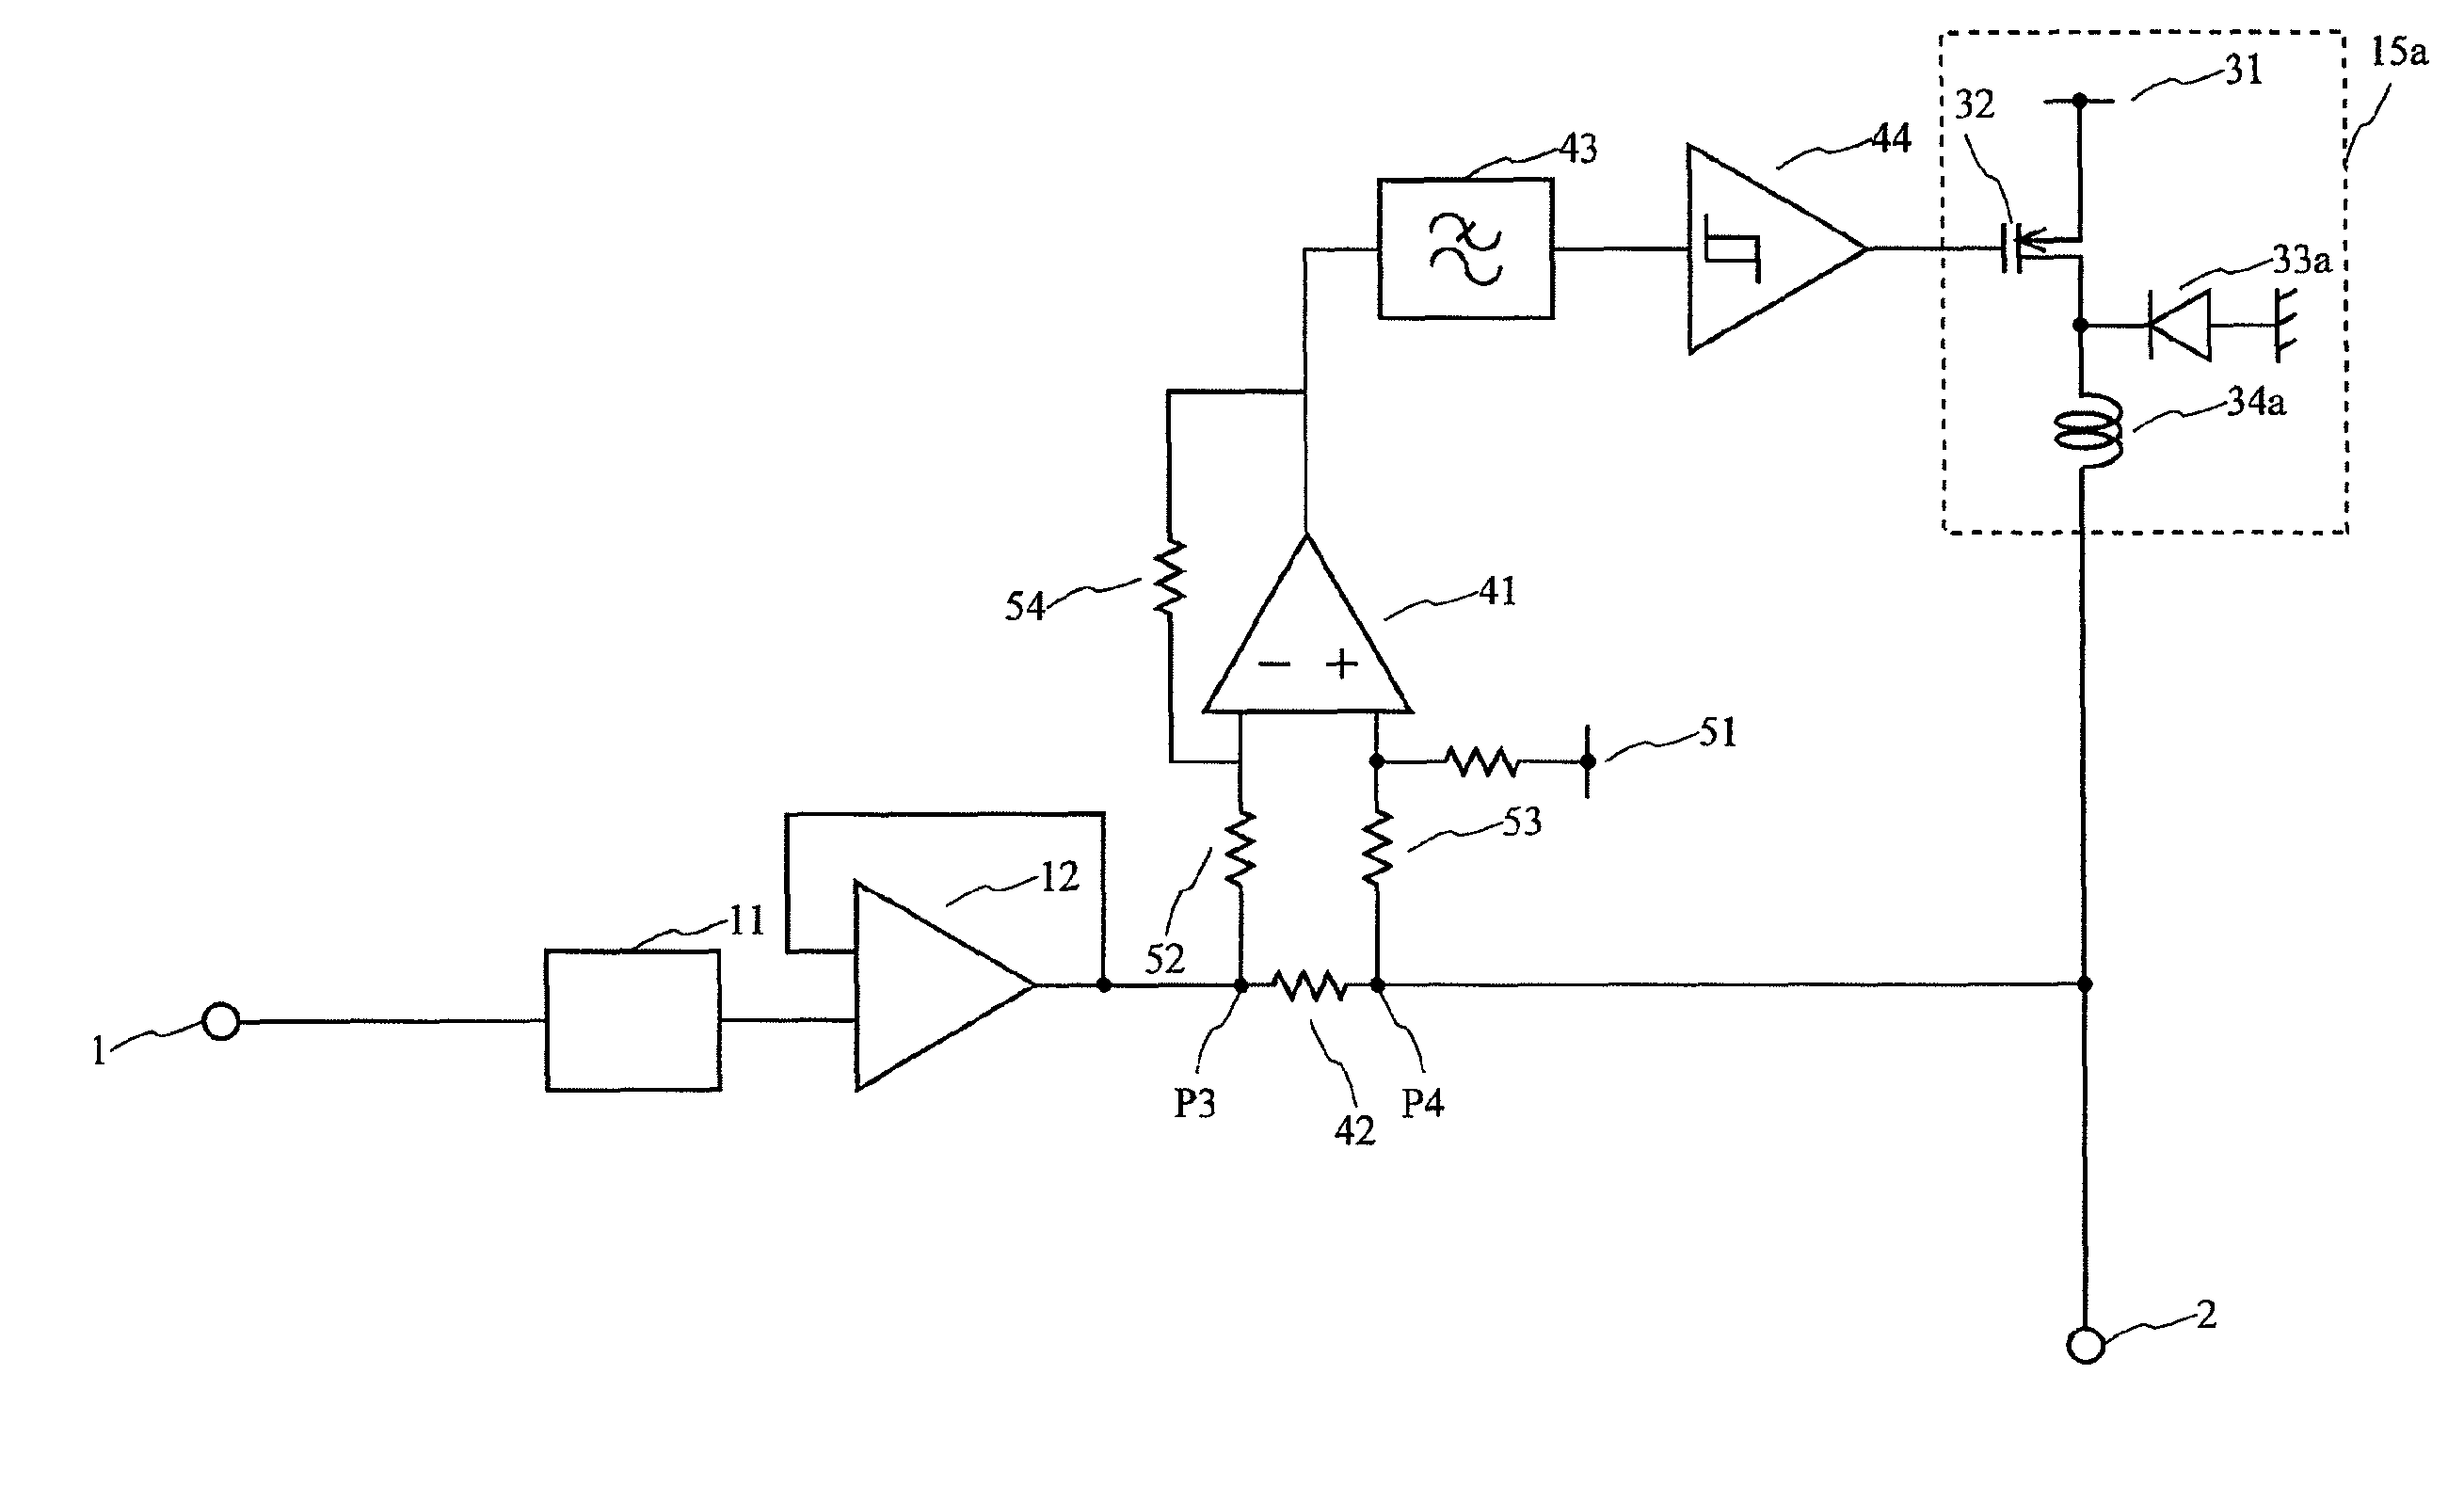 Power circuit used for an amplifier